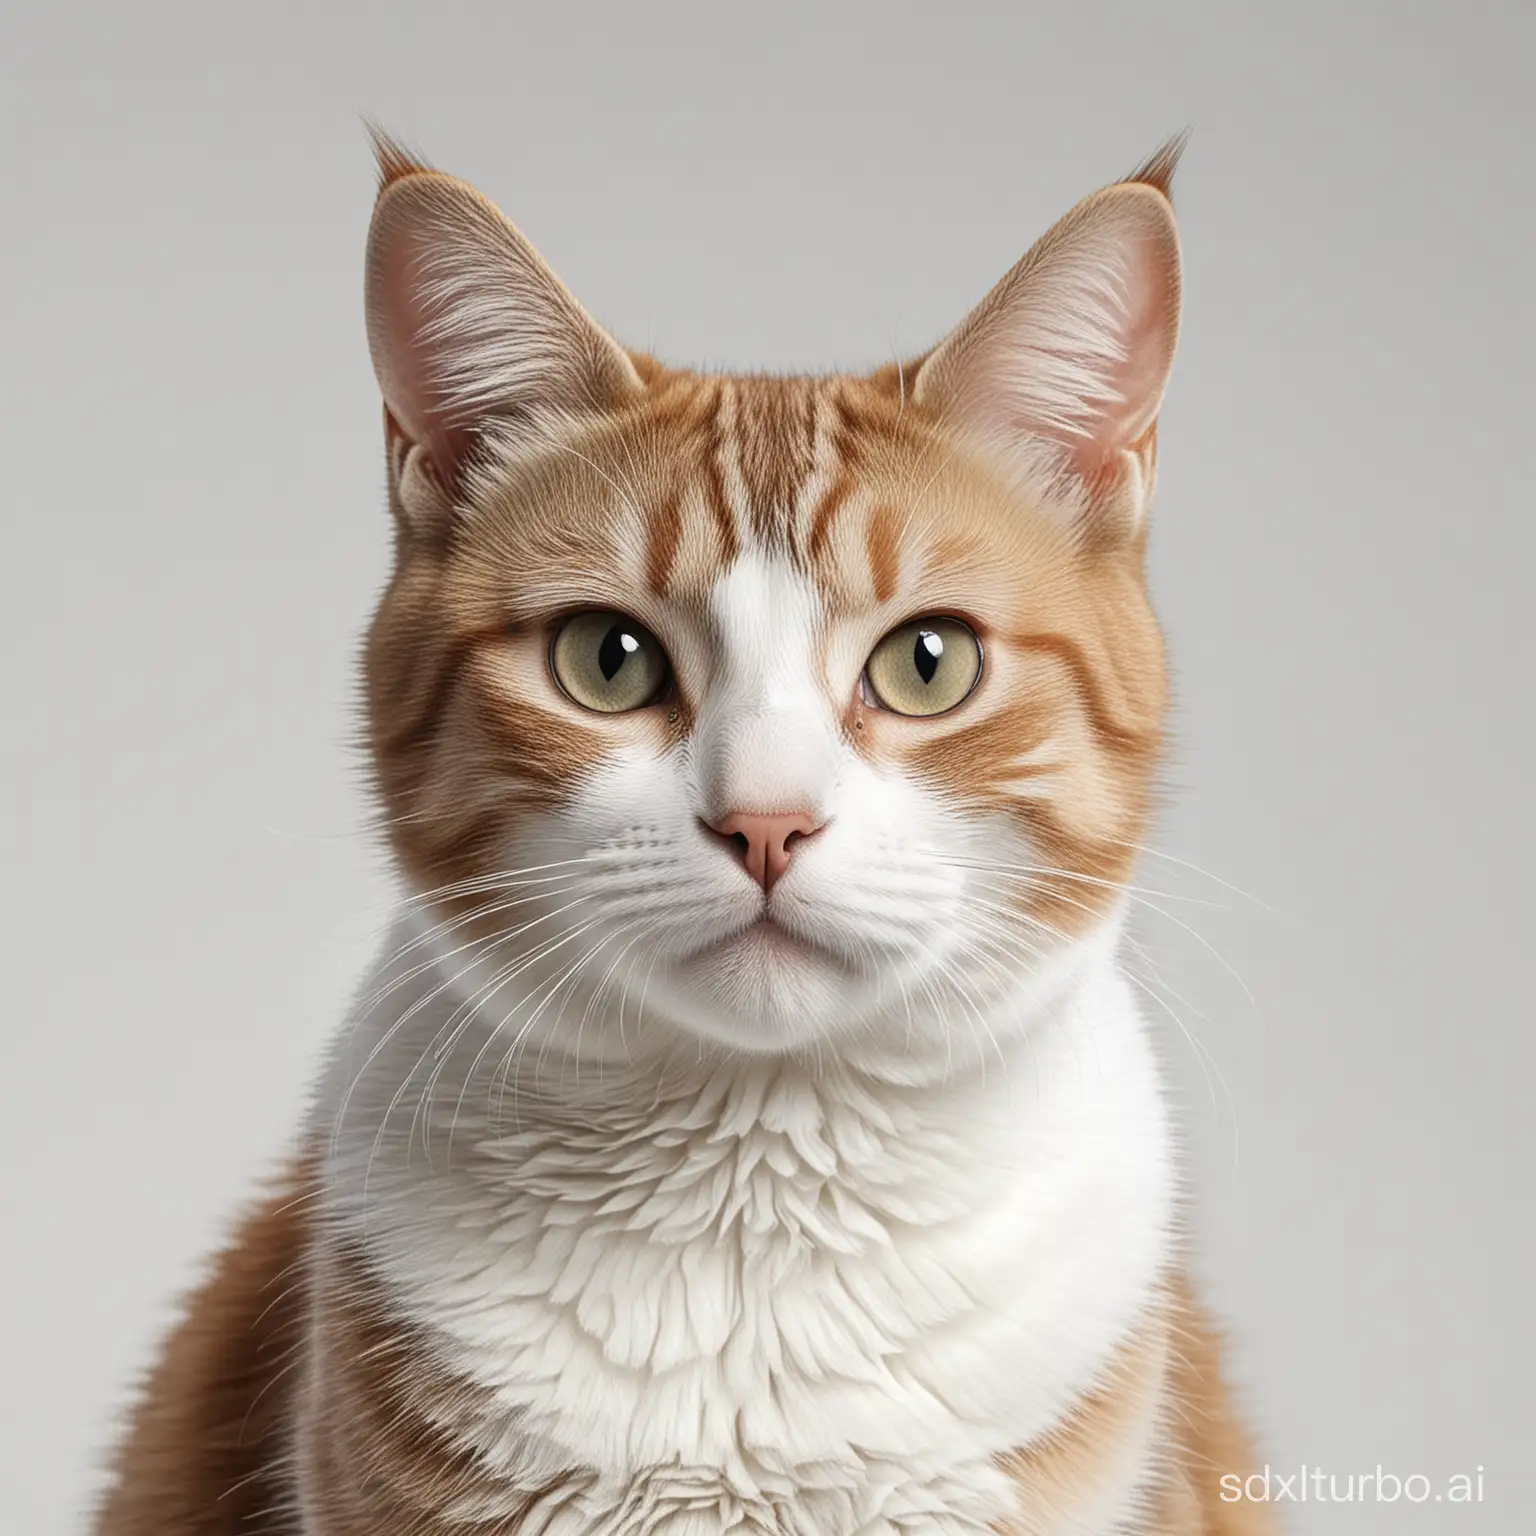 A cat looking at the camera. High quality photo, the background is pure white, photorealistic